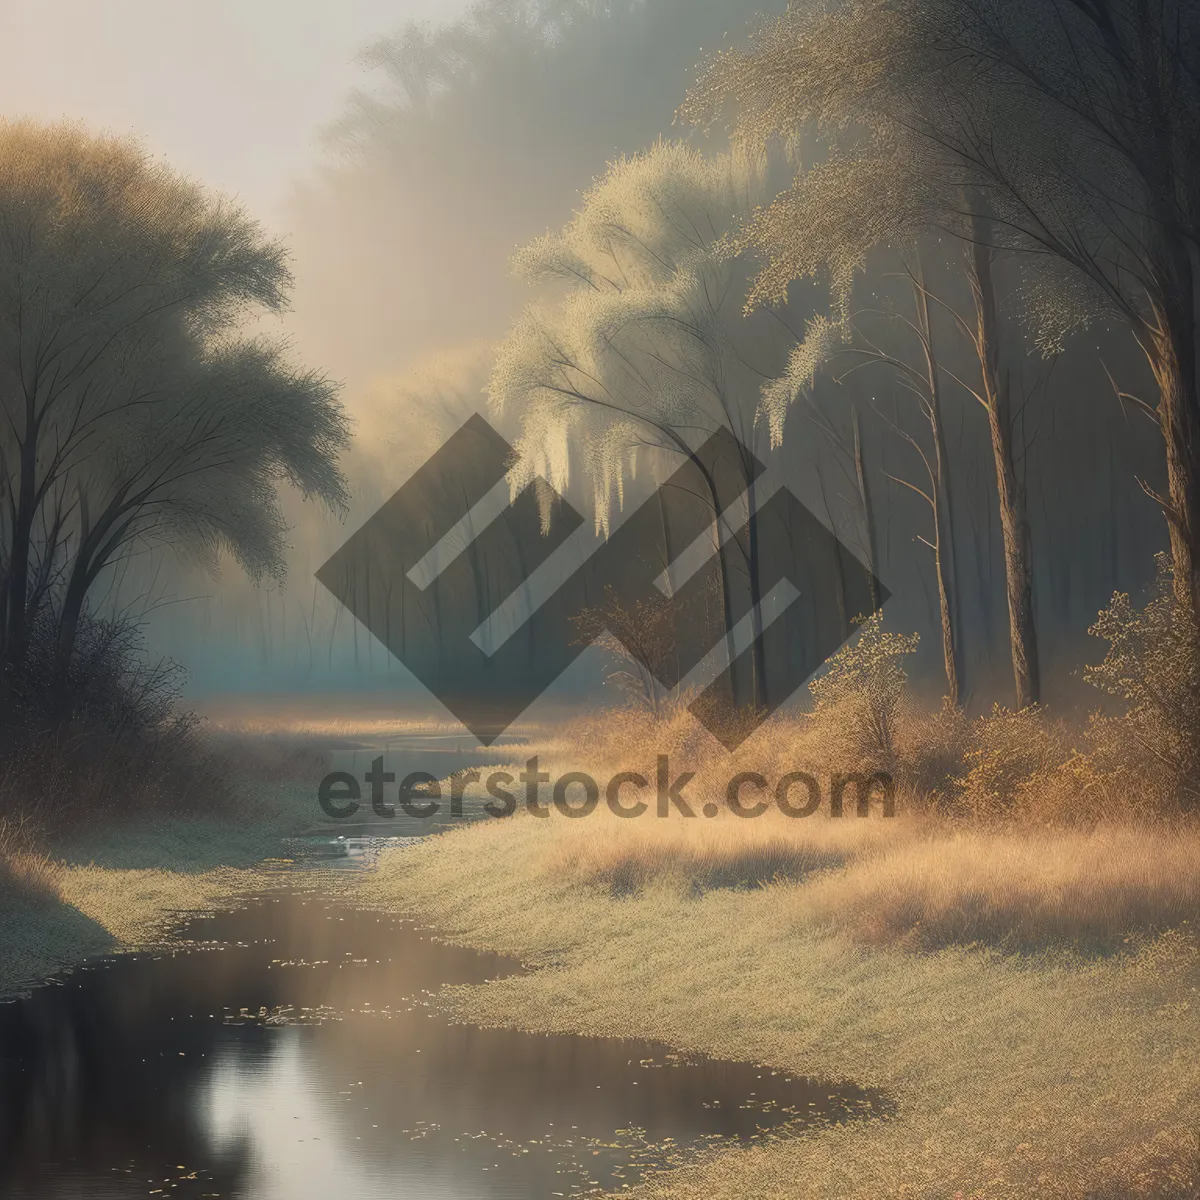 Picture of Rural Sunset: Reed-lined Sky, Scenic Landscape with Tree